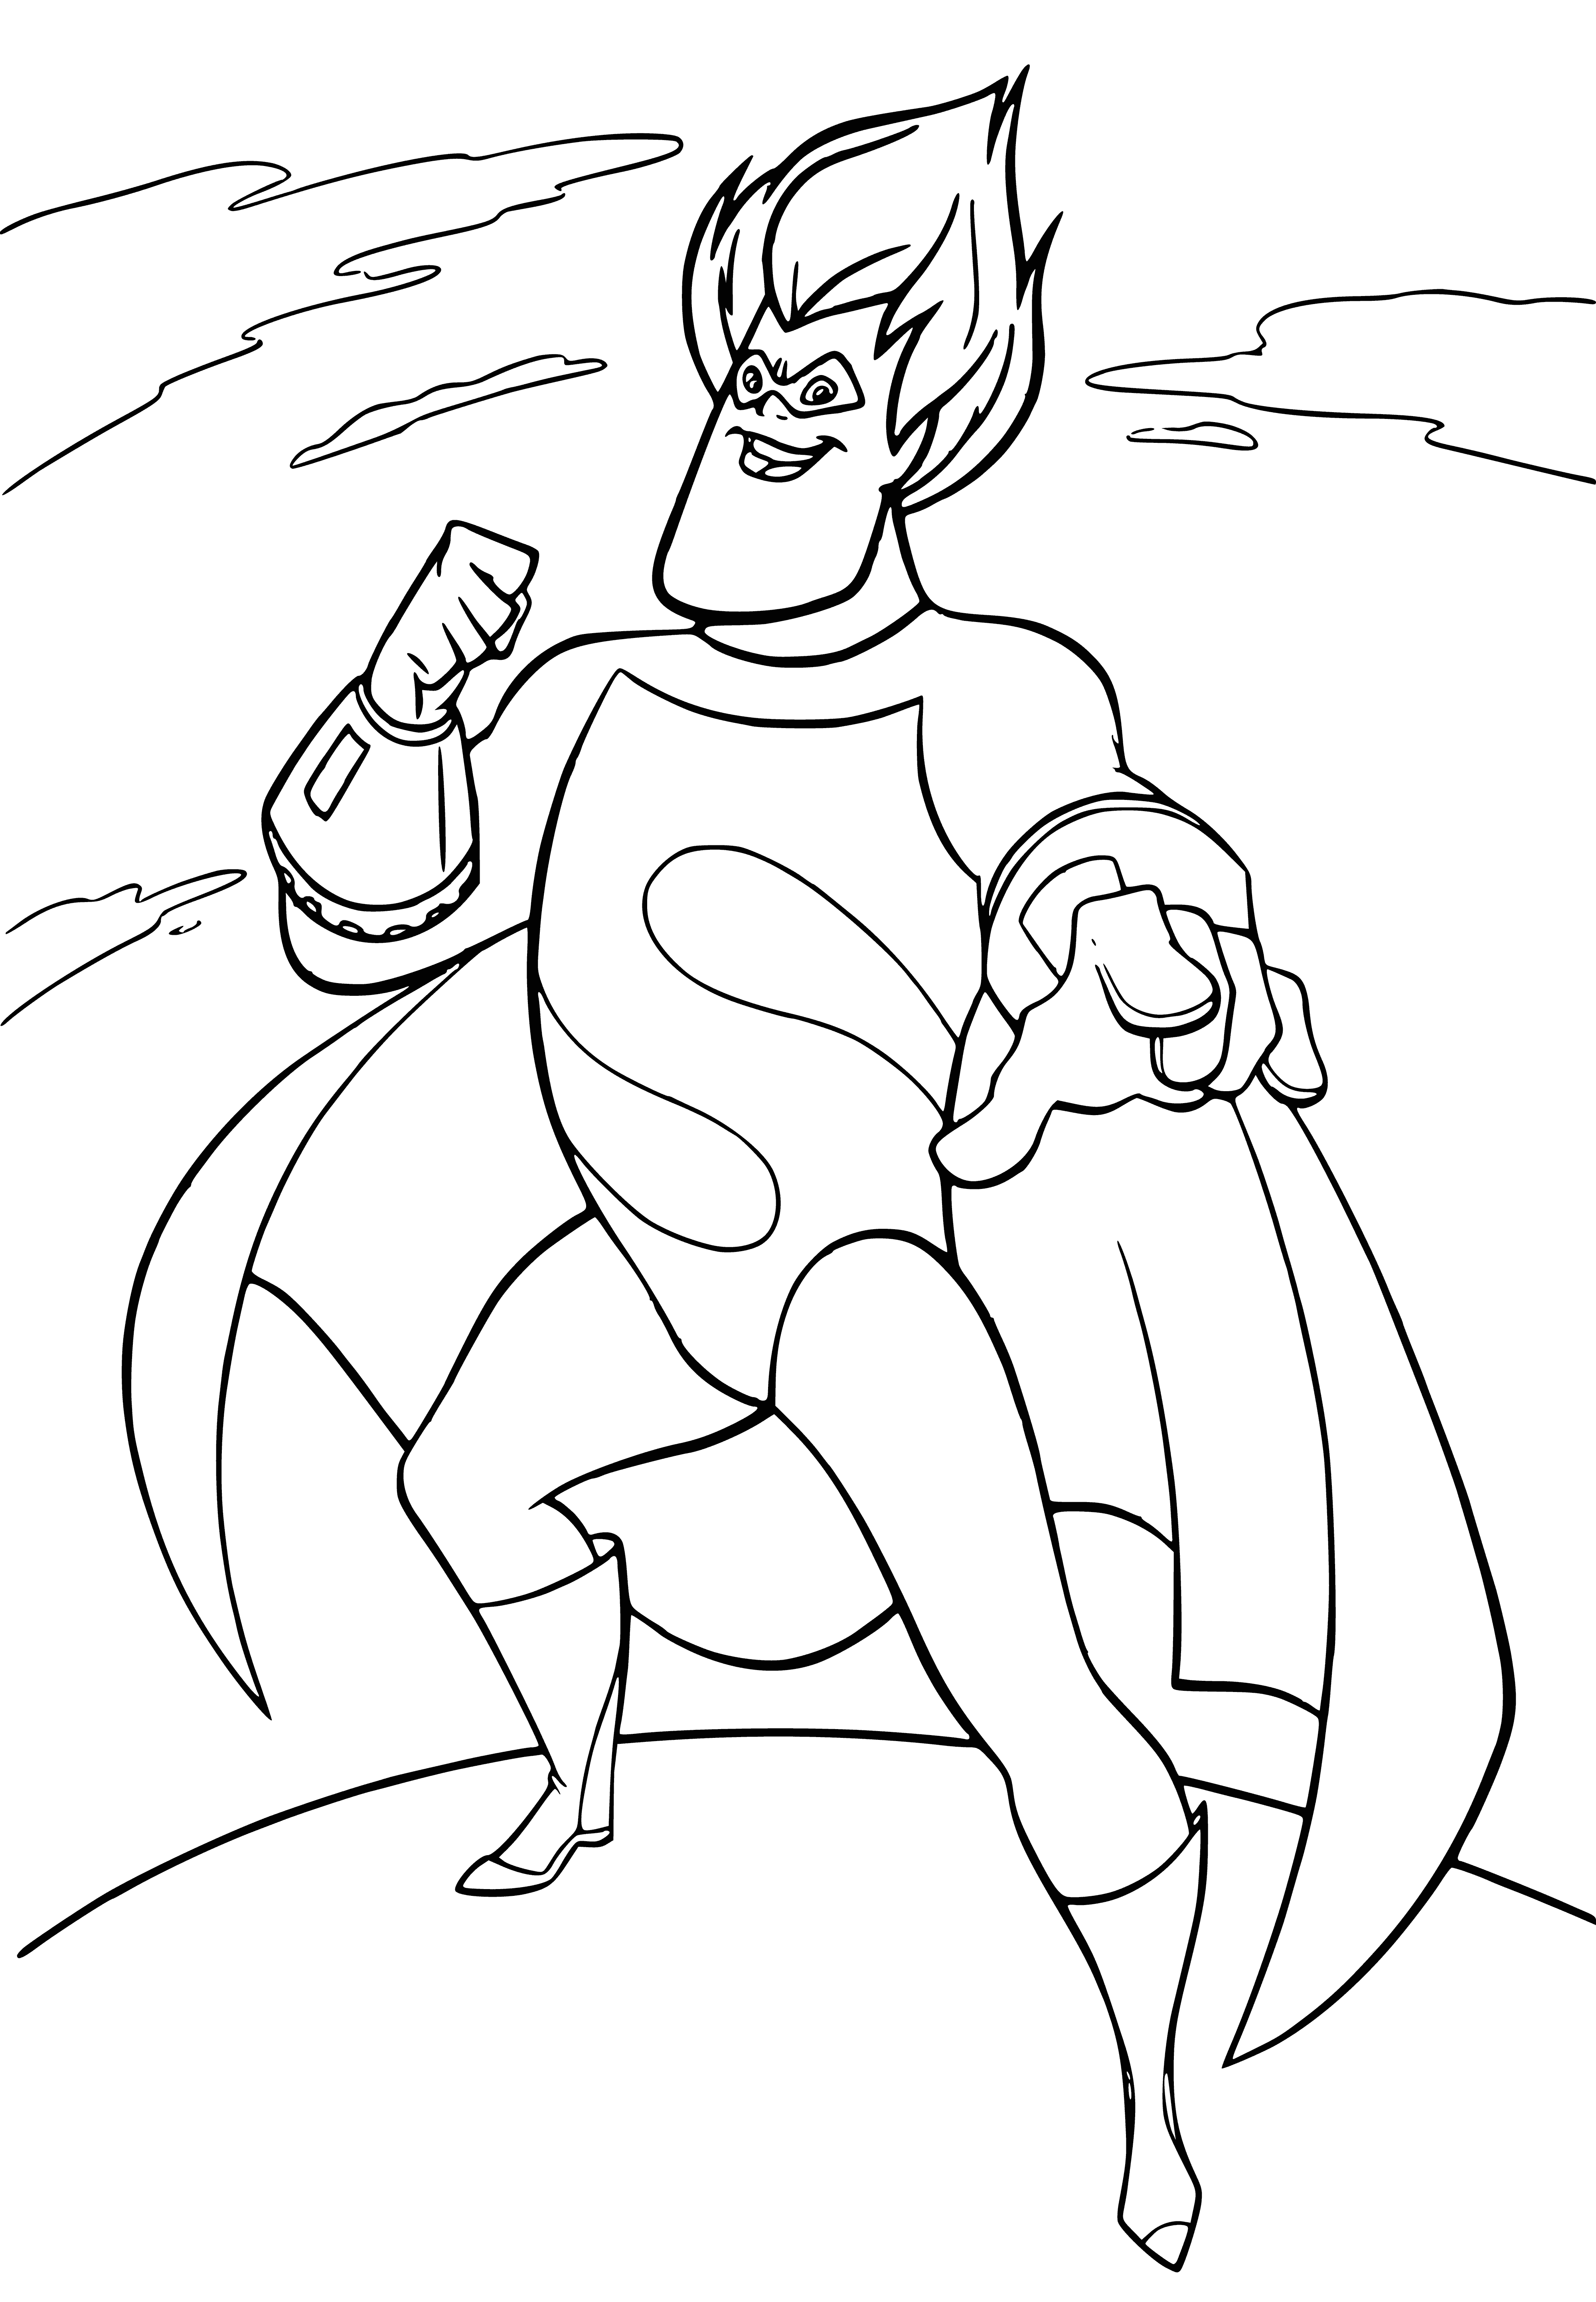 Villain Syndrome coloring page